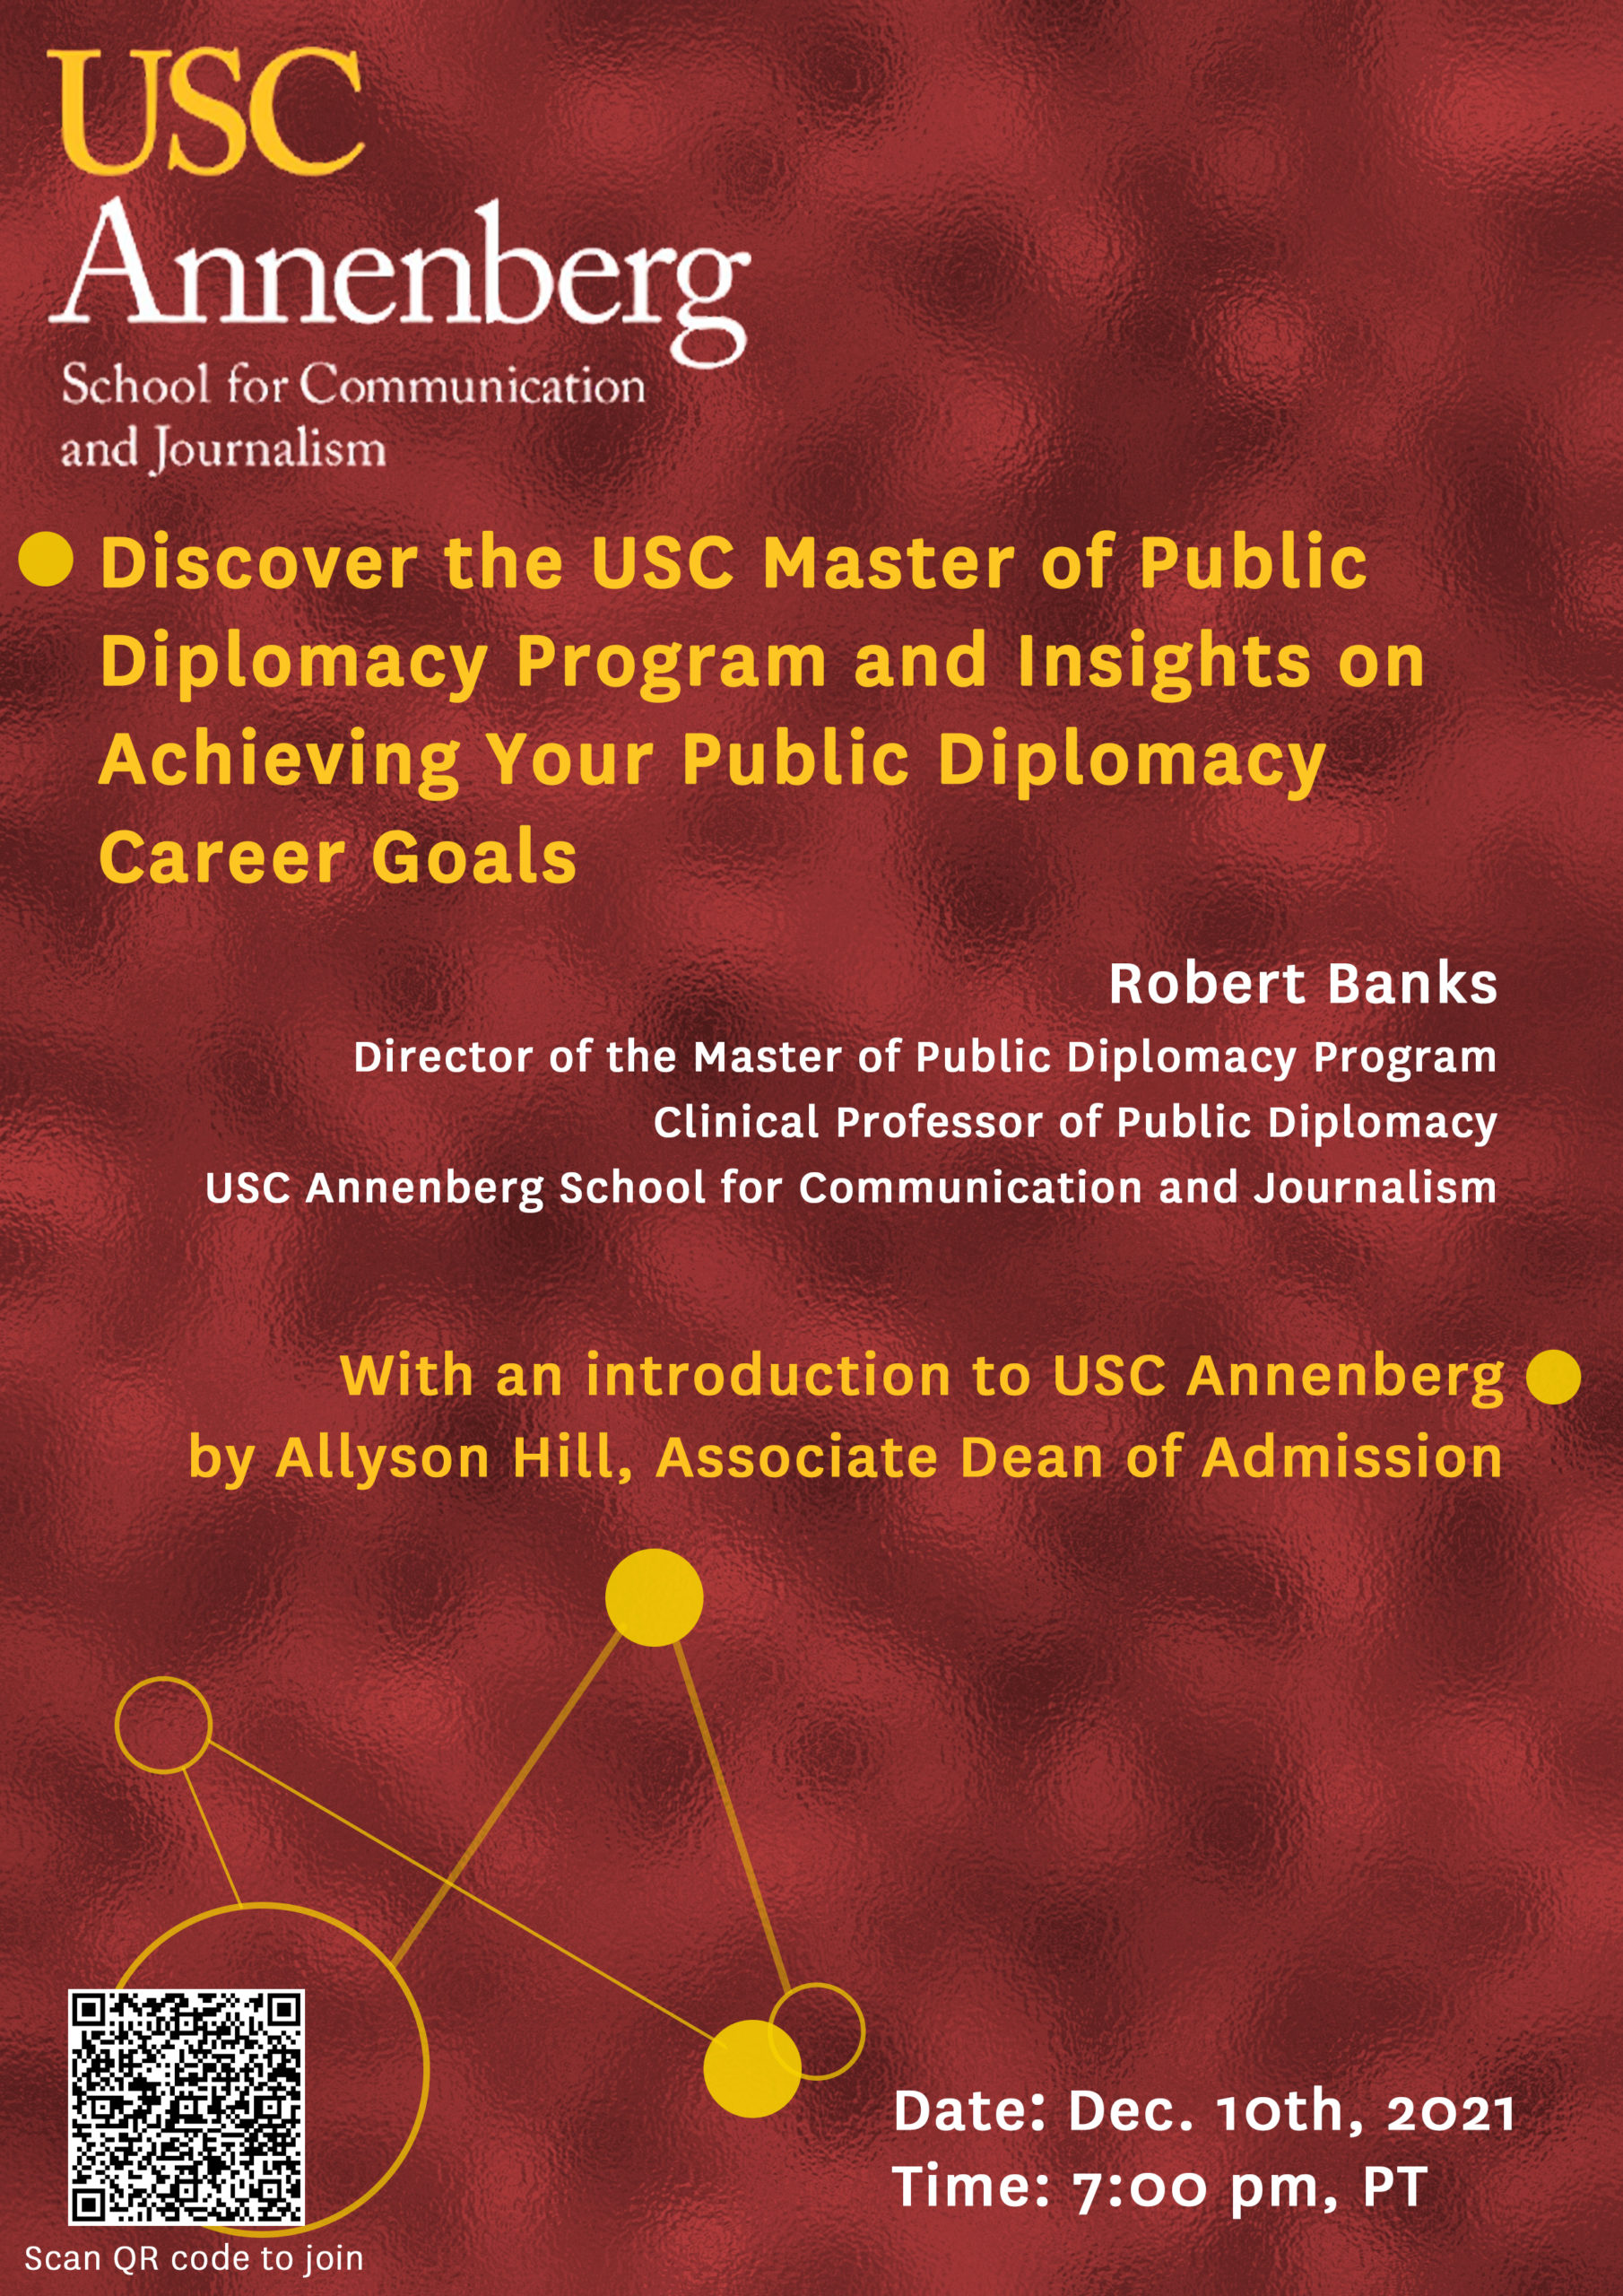 Discover the USC Master of Public Diplomacy Program and Insights on Achieving Your Public Diplomacy Career Goals